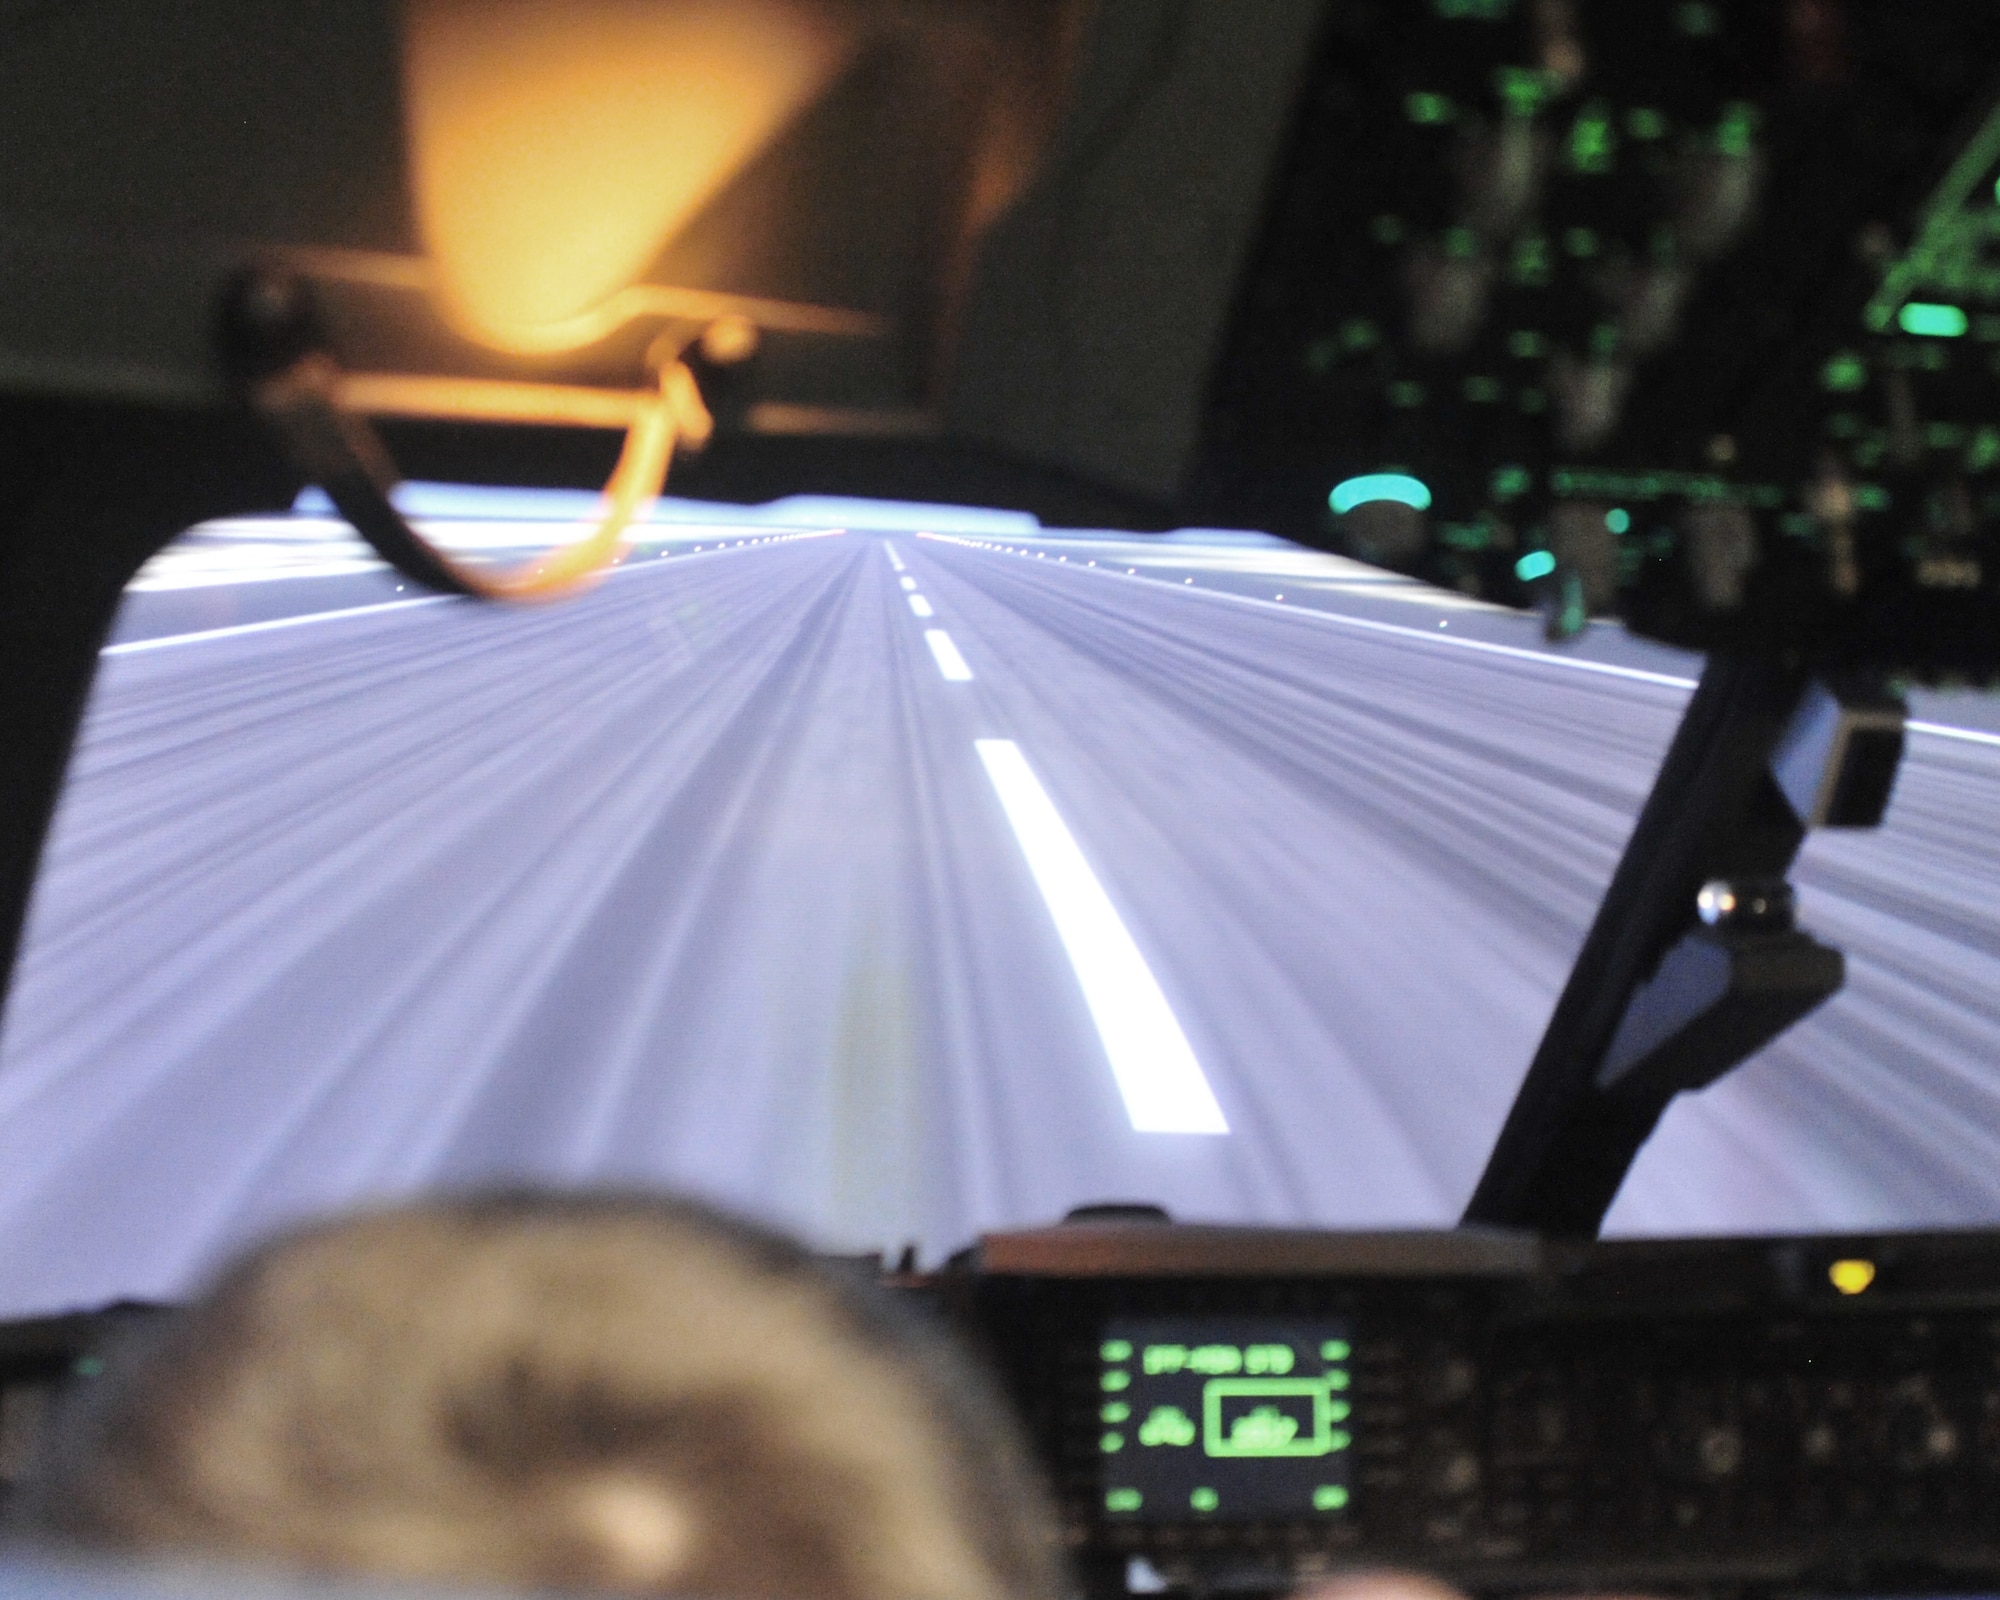 Evan Waara, "Pilot for a Day," attempts to "land" while on a C-17 aircraft simulator July 7 at Joint Base Lewis-McChord, Wash. The simulator was only one of several events during Evan's participation in the Pilot for a Day program. (Air Force photo/Staff Sgt. Frances Kriss)